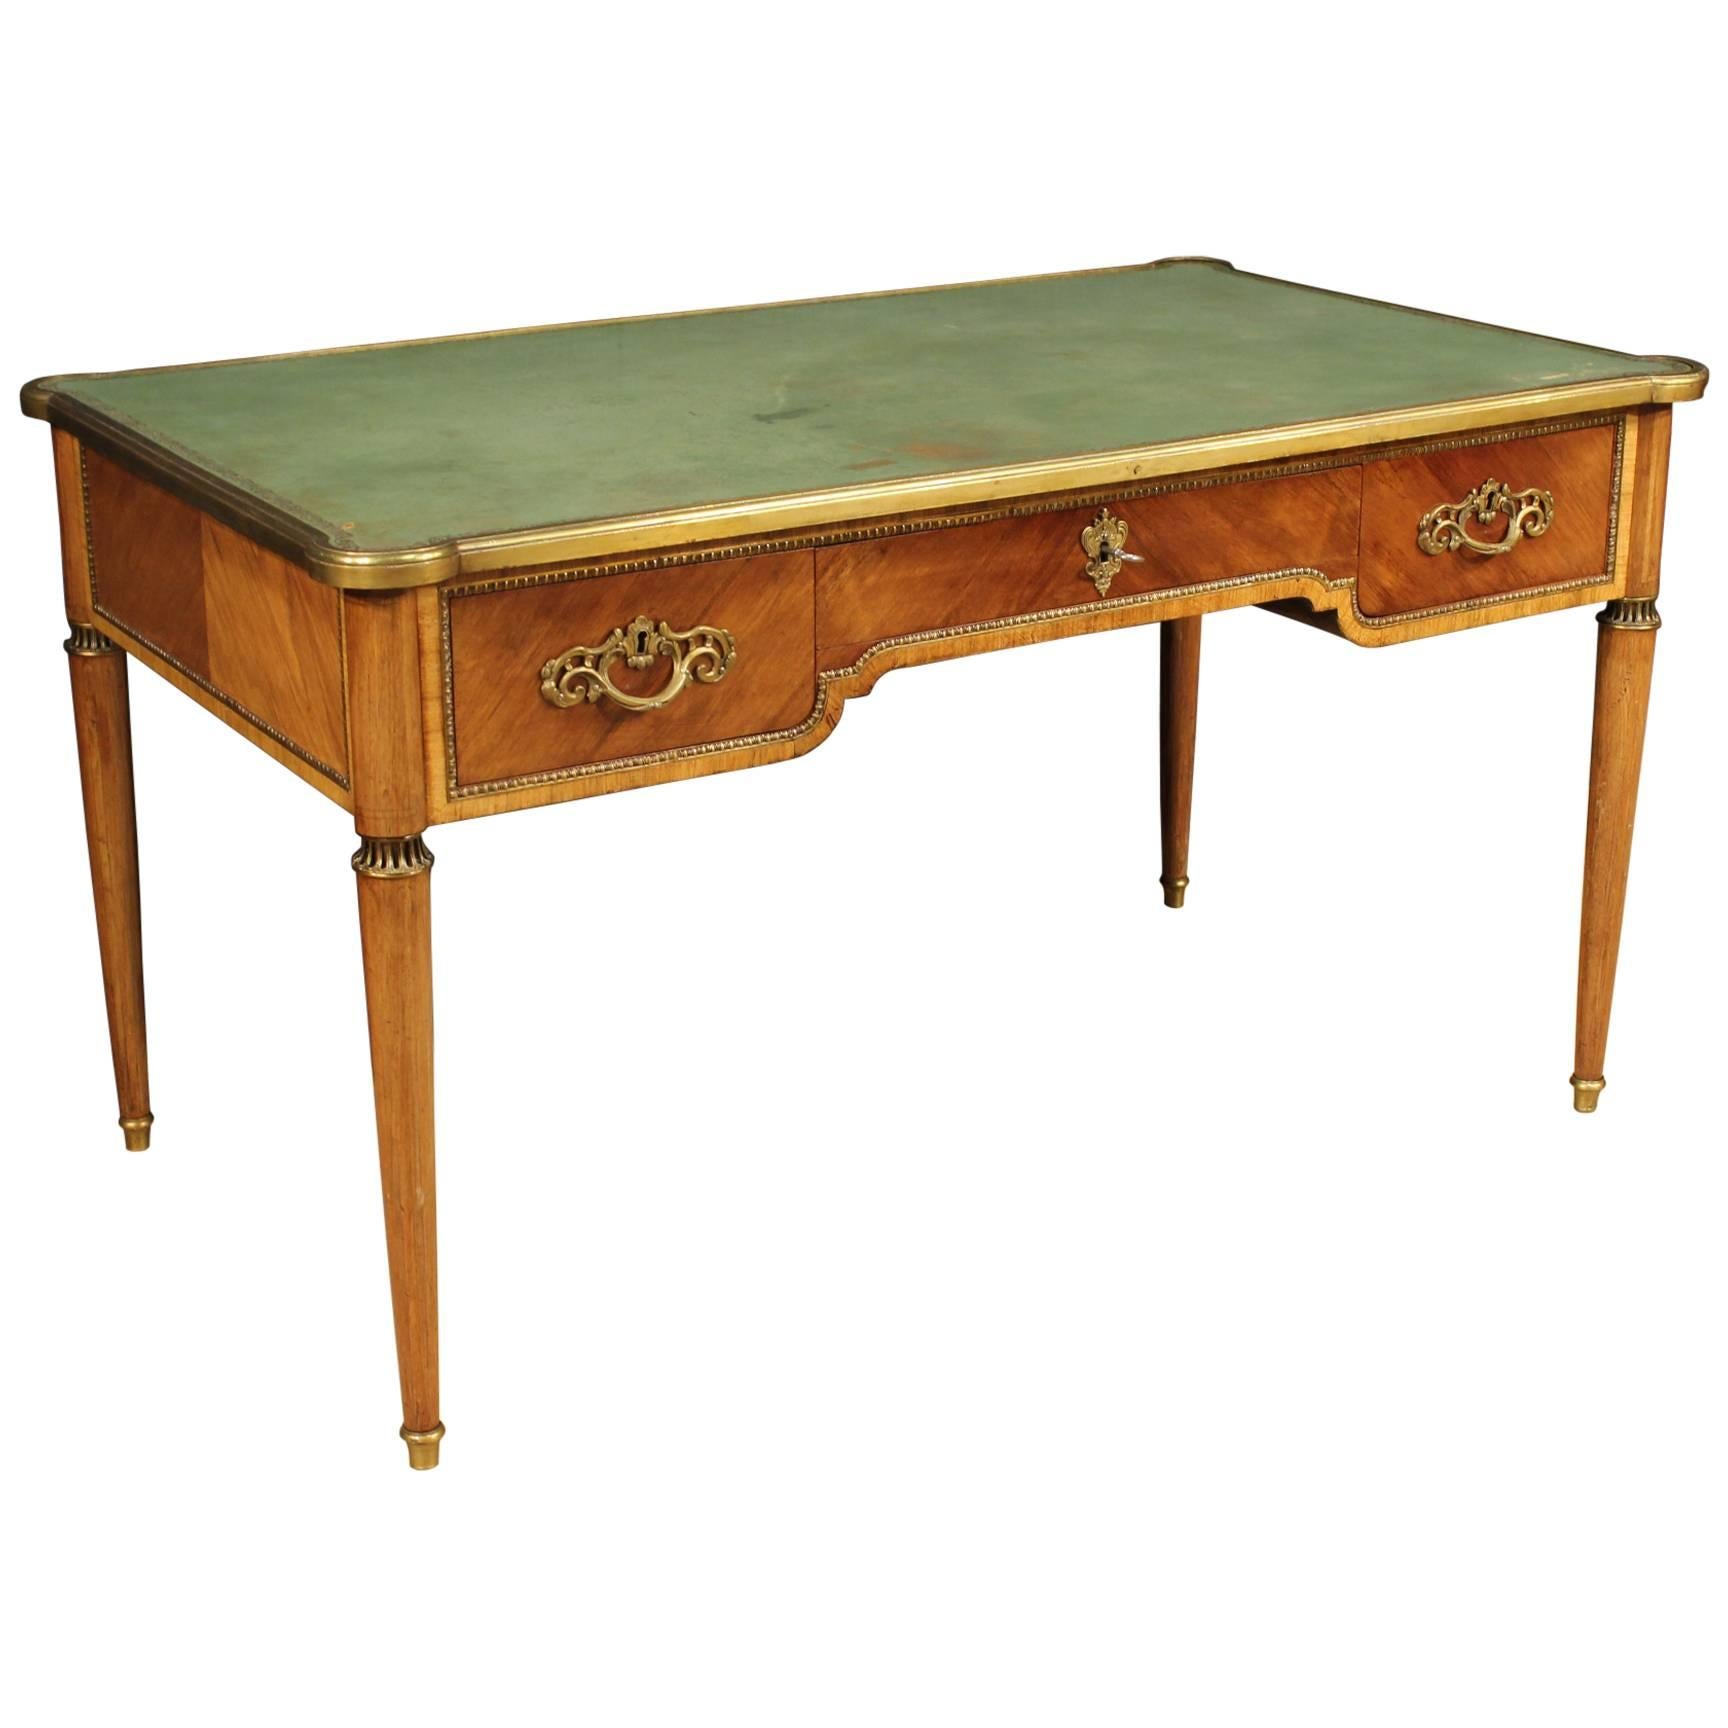 19th Century English Rosewood Desk with Green Leather